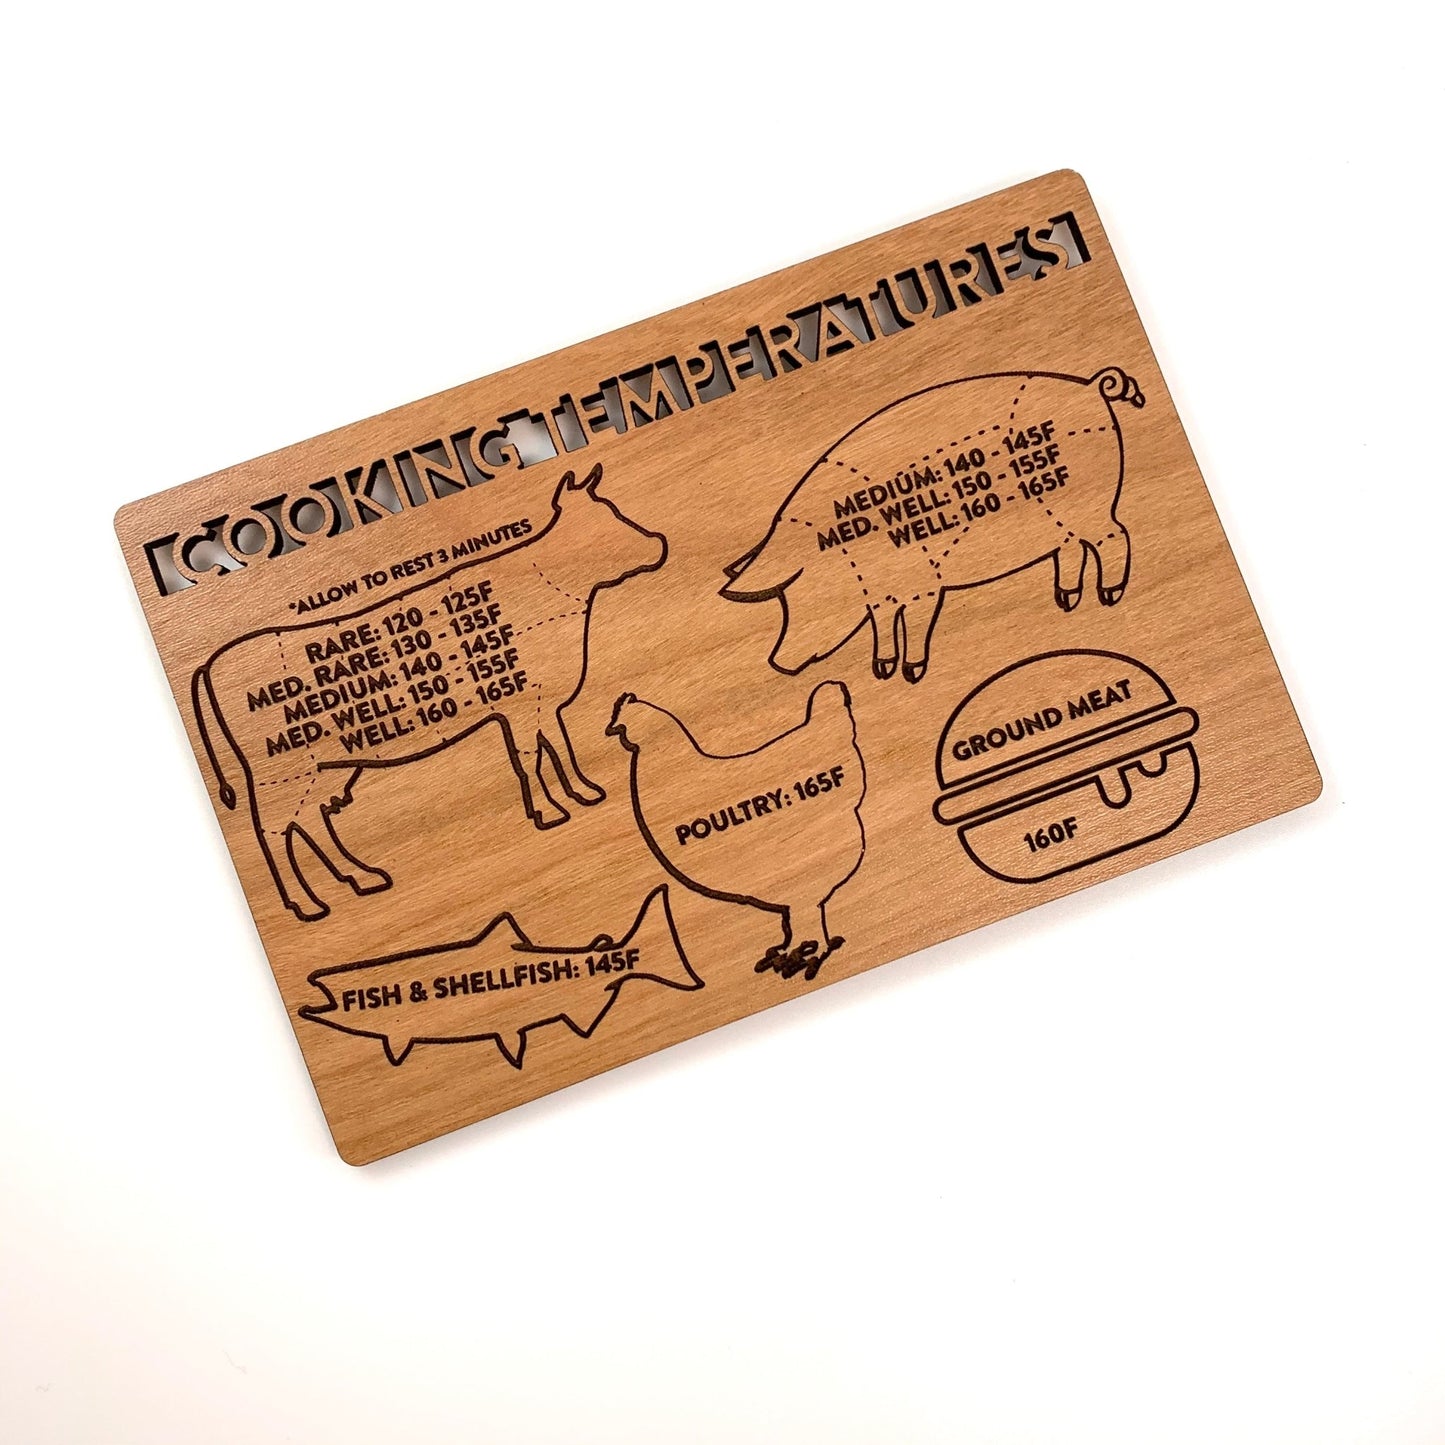 Meat Cooking Temperatures Magnet - laser cut and laser engraved cherry wood - by LeeMo Designs in Bend, Oregon